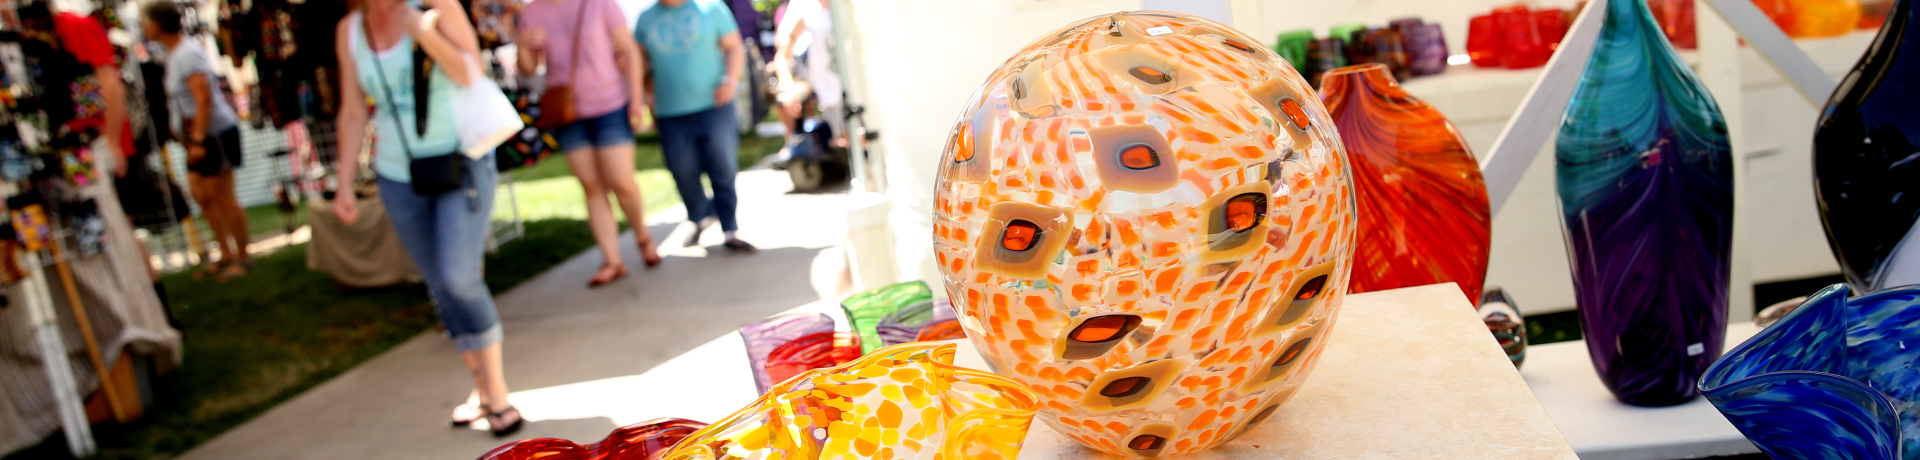 A glass artwork showcased at the Crafts Faire